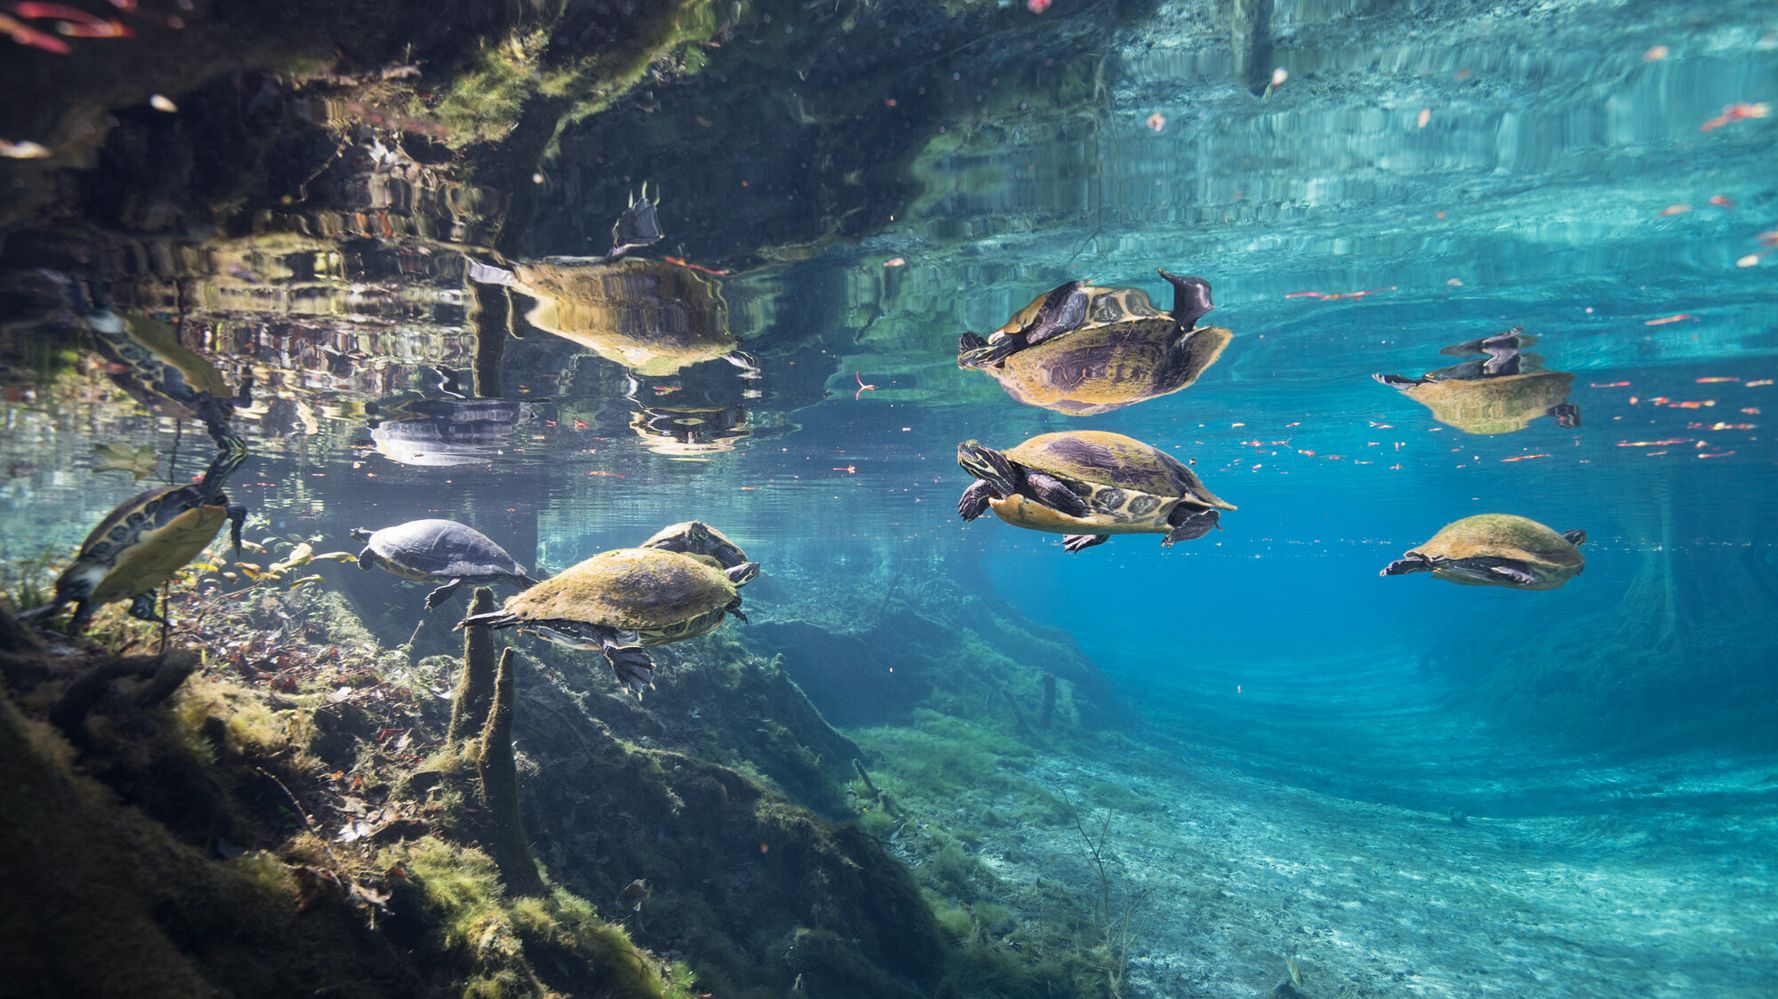 The Plight Of Florida's Turtles Tells A Troubling Story About Climate Destruction - HuffPost